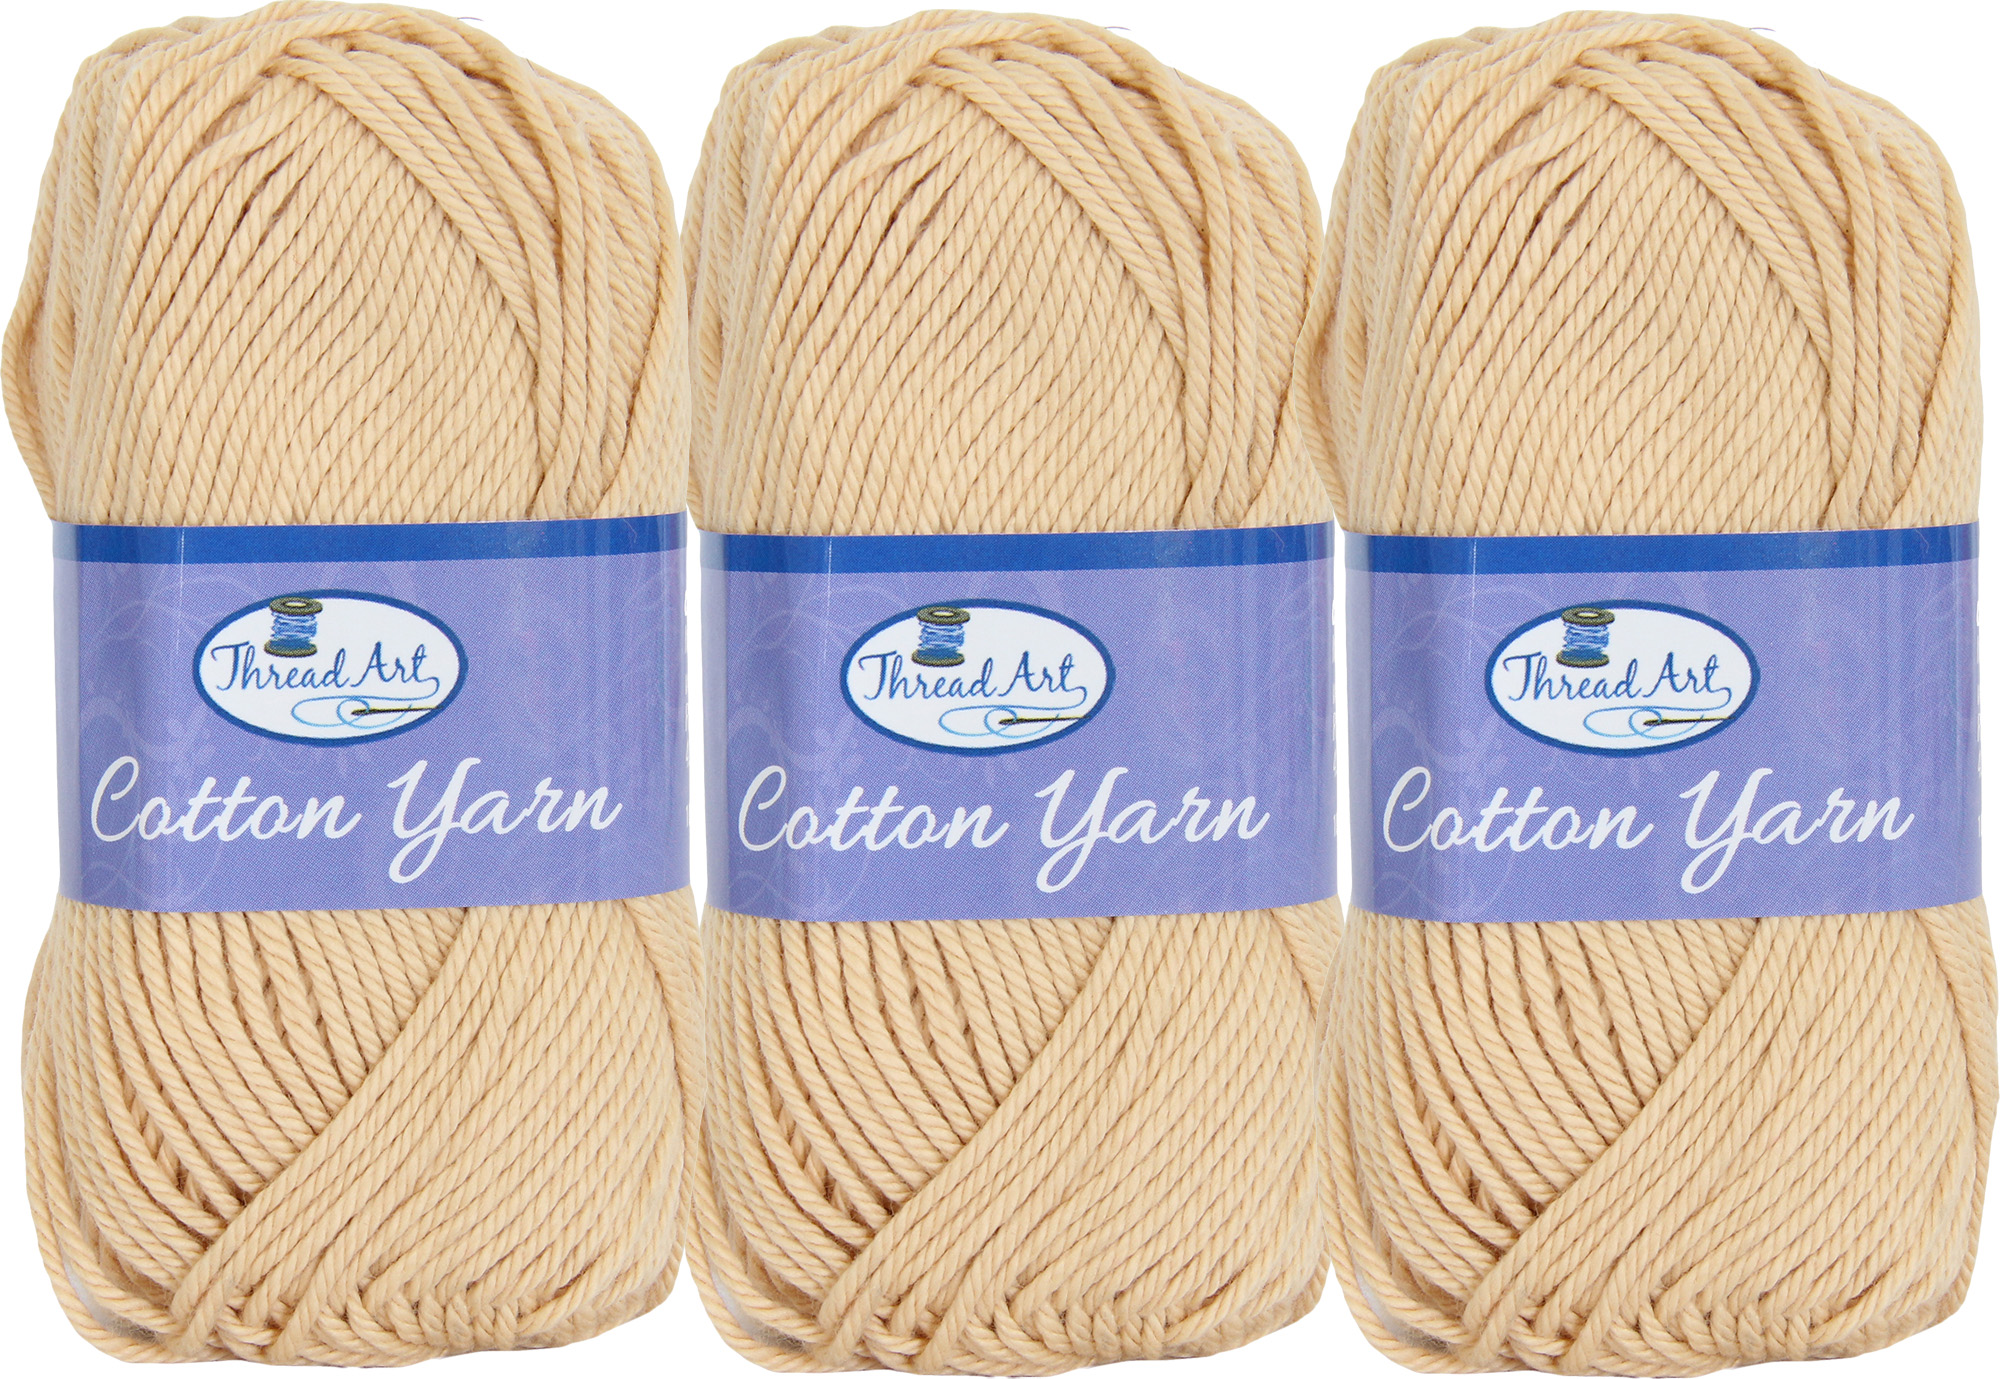 3 Pack of 100% Pure Cotton Crochet Yarn by Threadart | Lt. Beige | 50 gram  Skeins | Worsted Medium #4 Yarn | 85 yds per Skein - 30 Colors Available